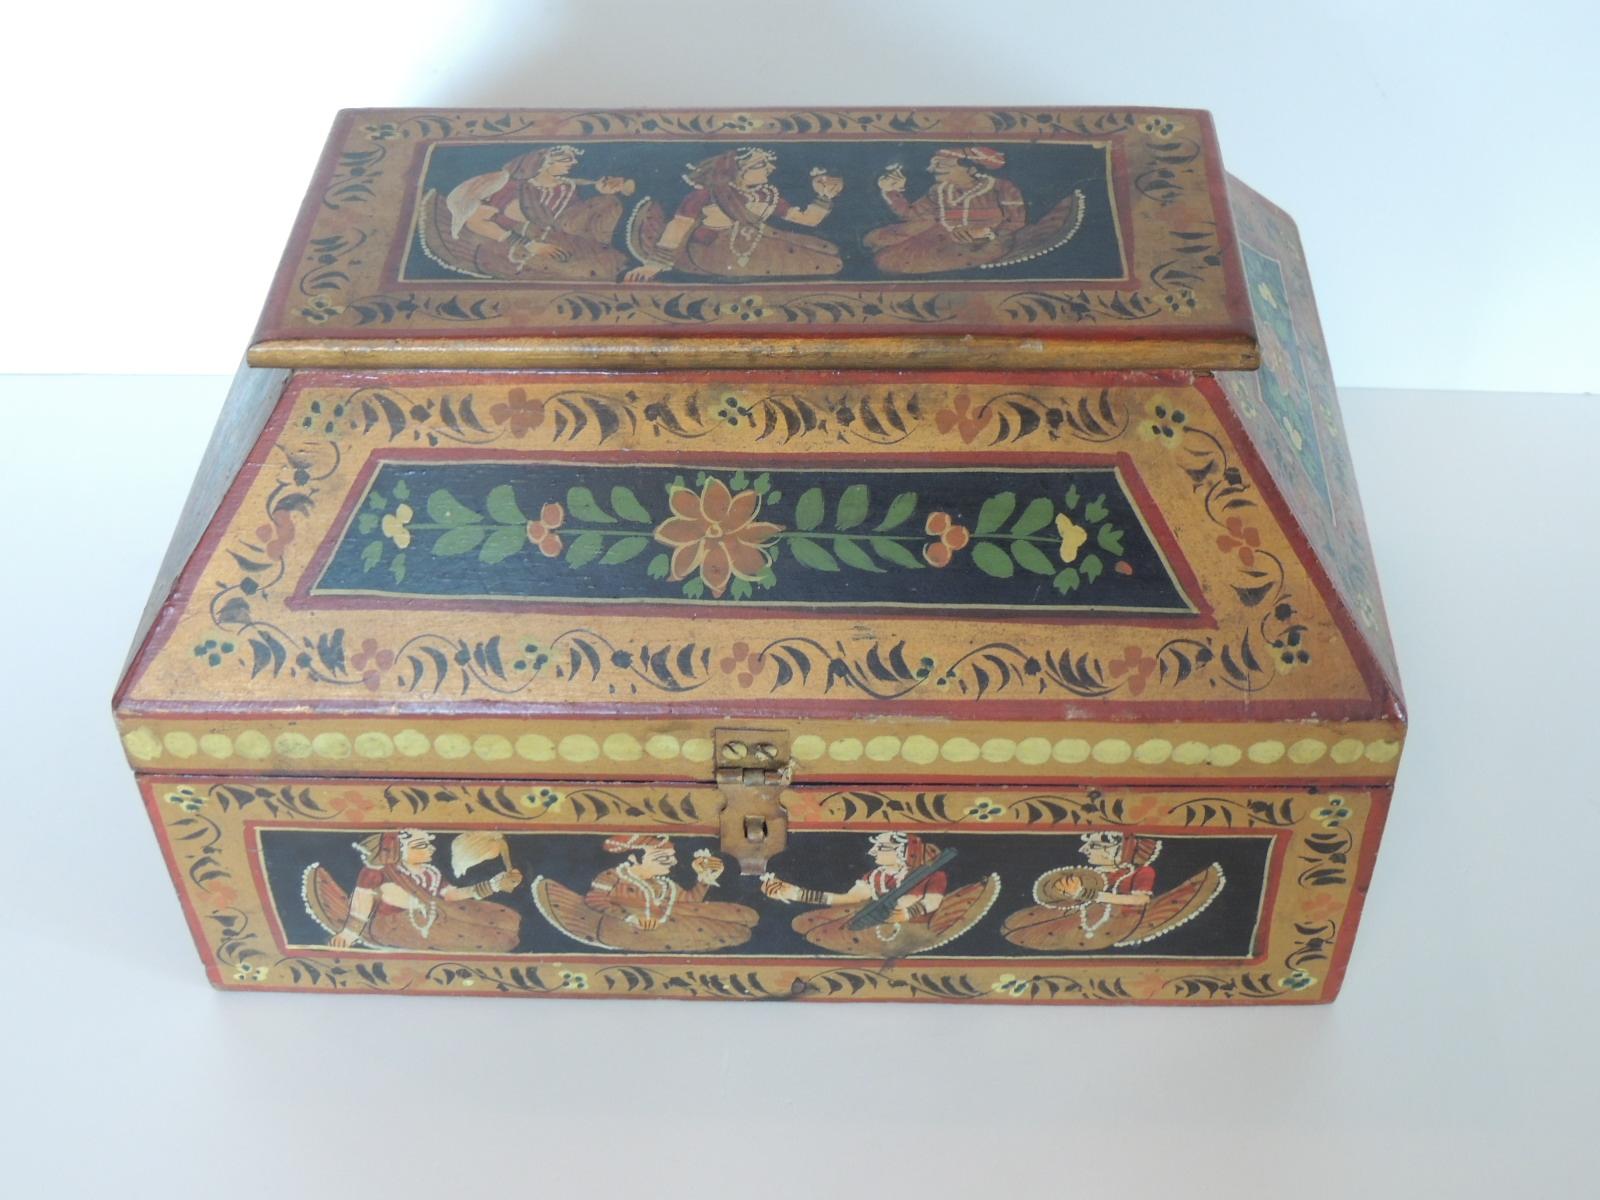 Vintage hand painted colorful Indian box with lid.
Depicting human figures and flowers, hand painted on wood.
Size: 12